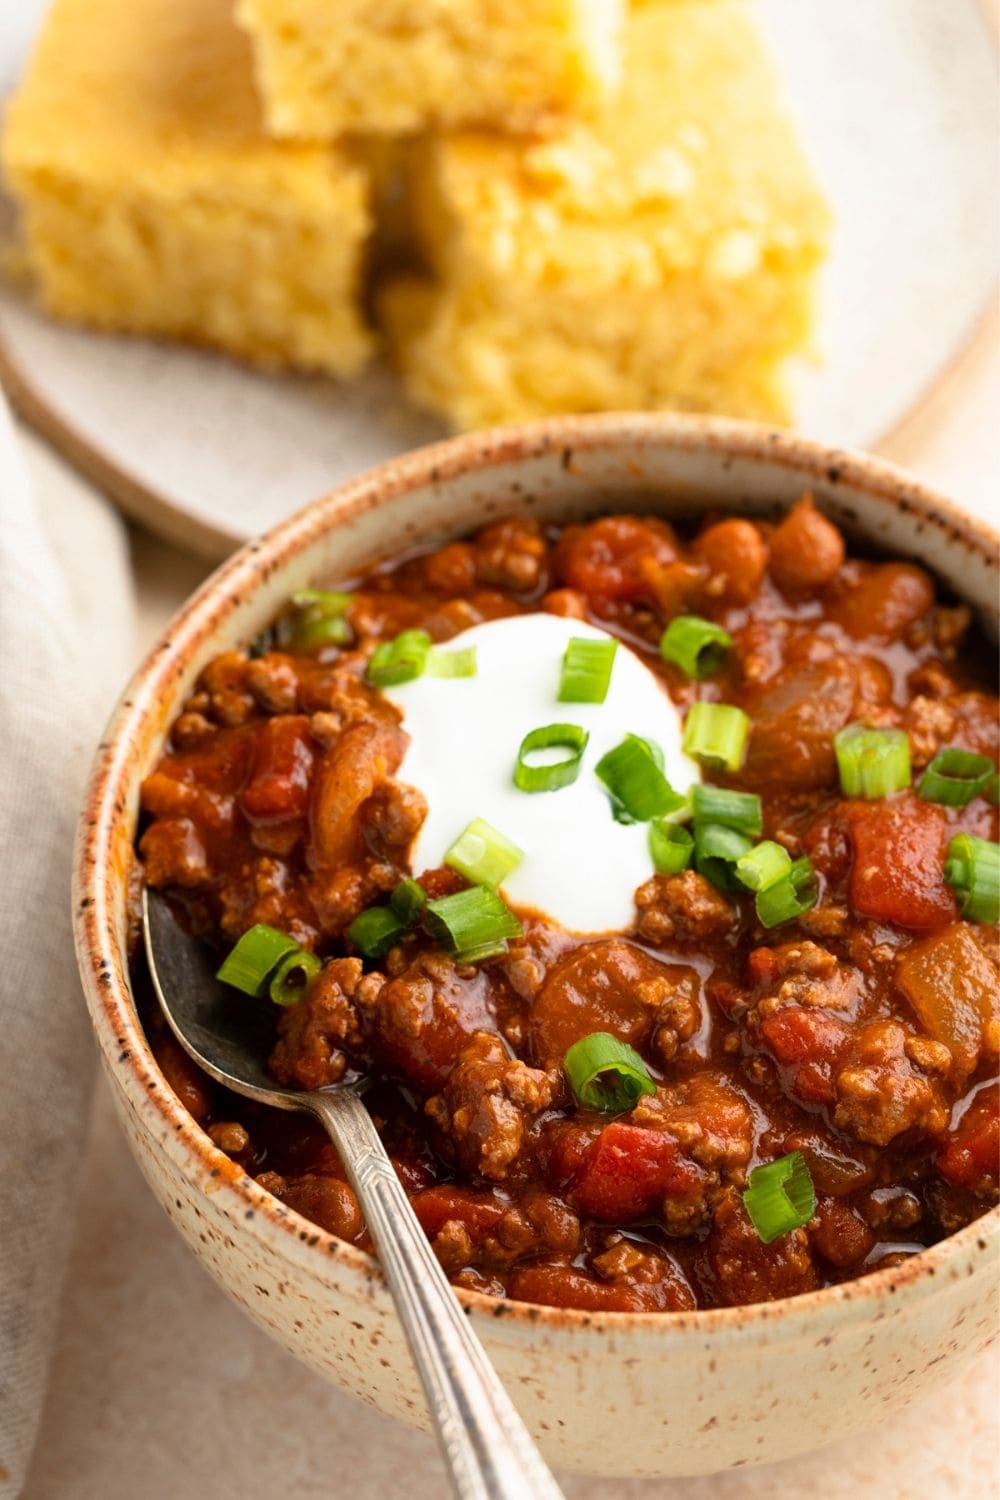 Homemade Hearty and Creamy Rotel Chili with Whipped Cream and Green Onions